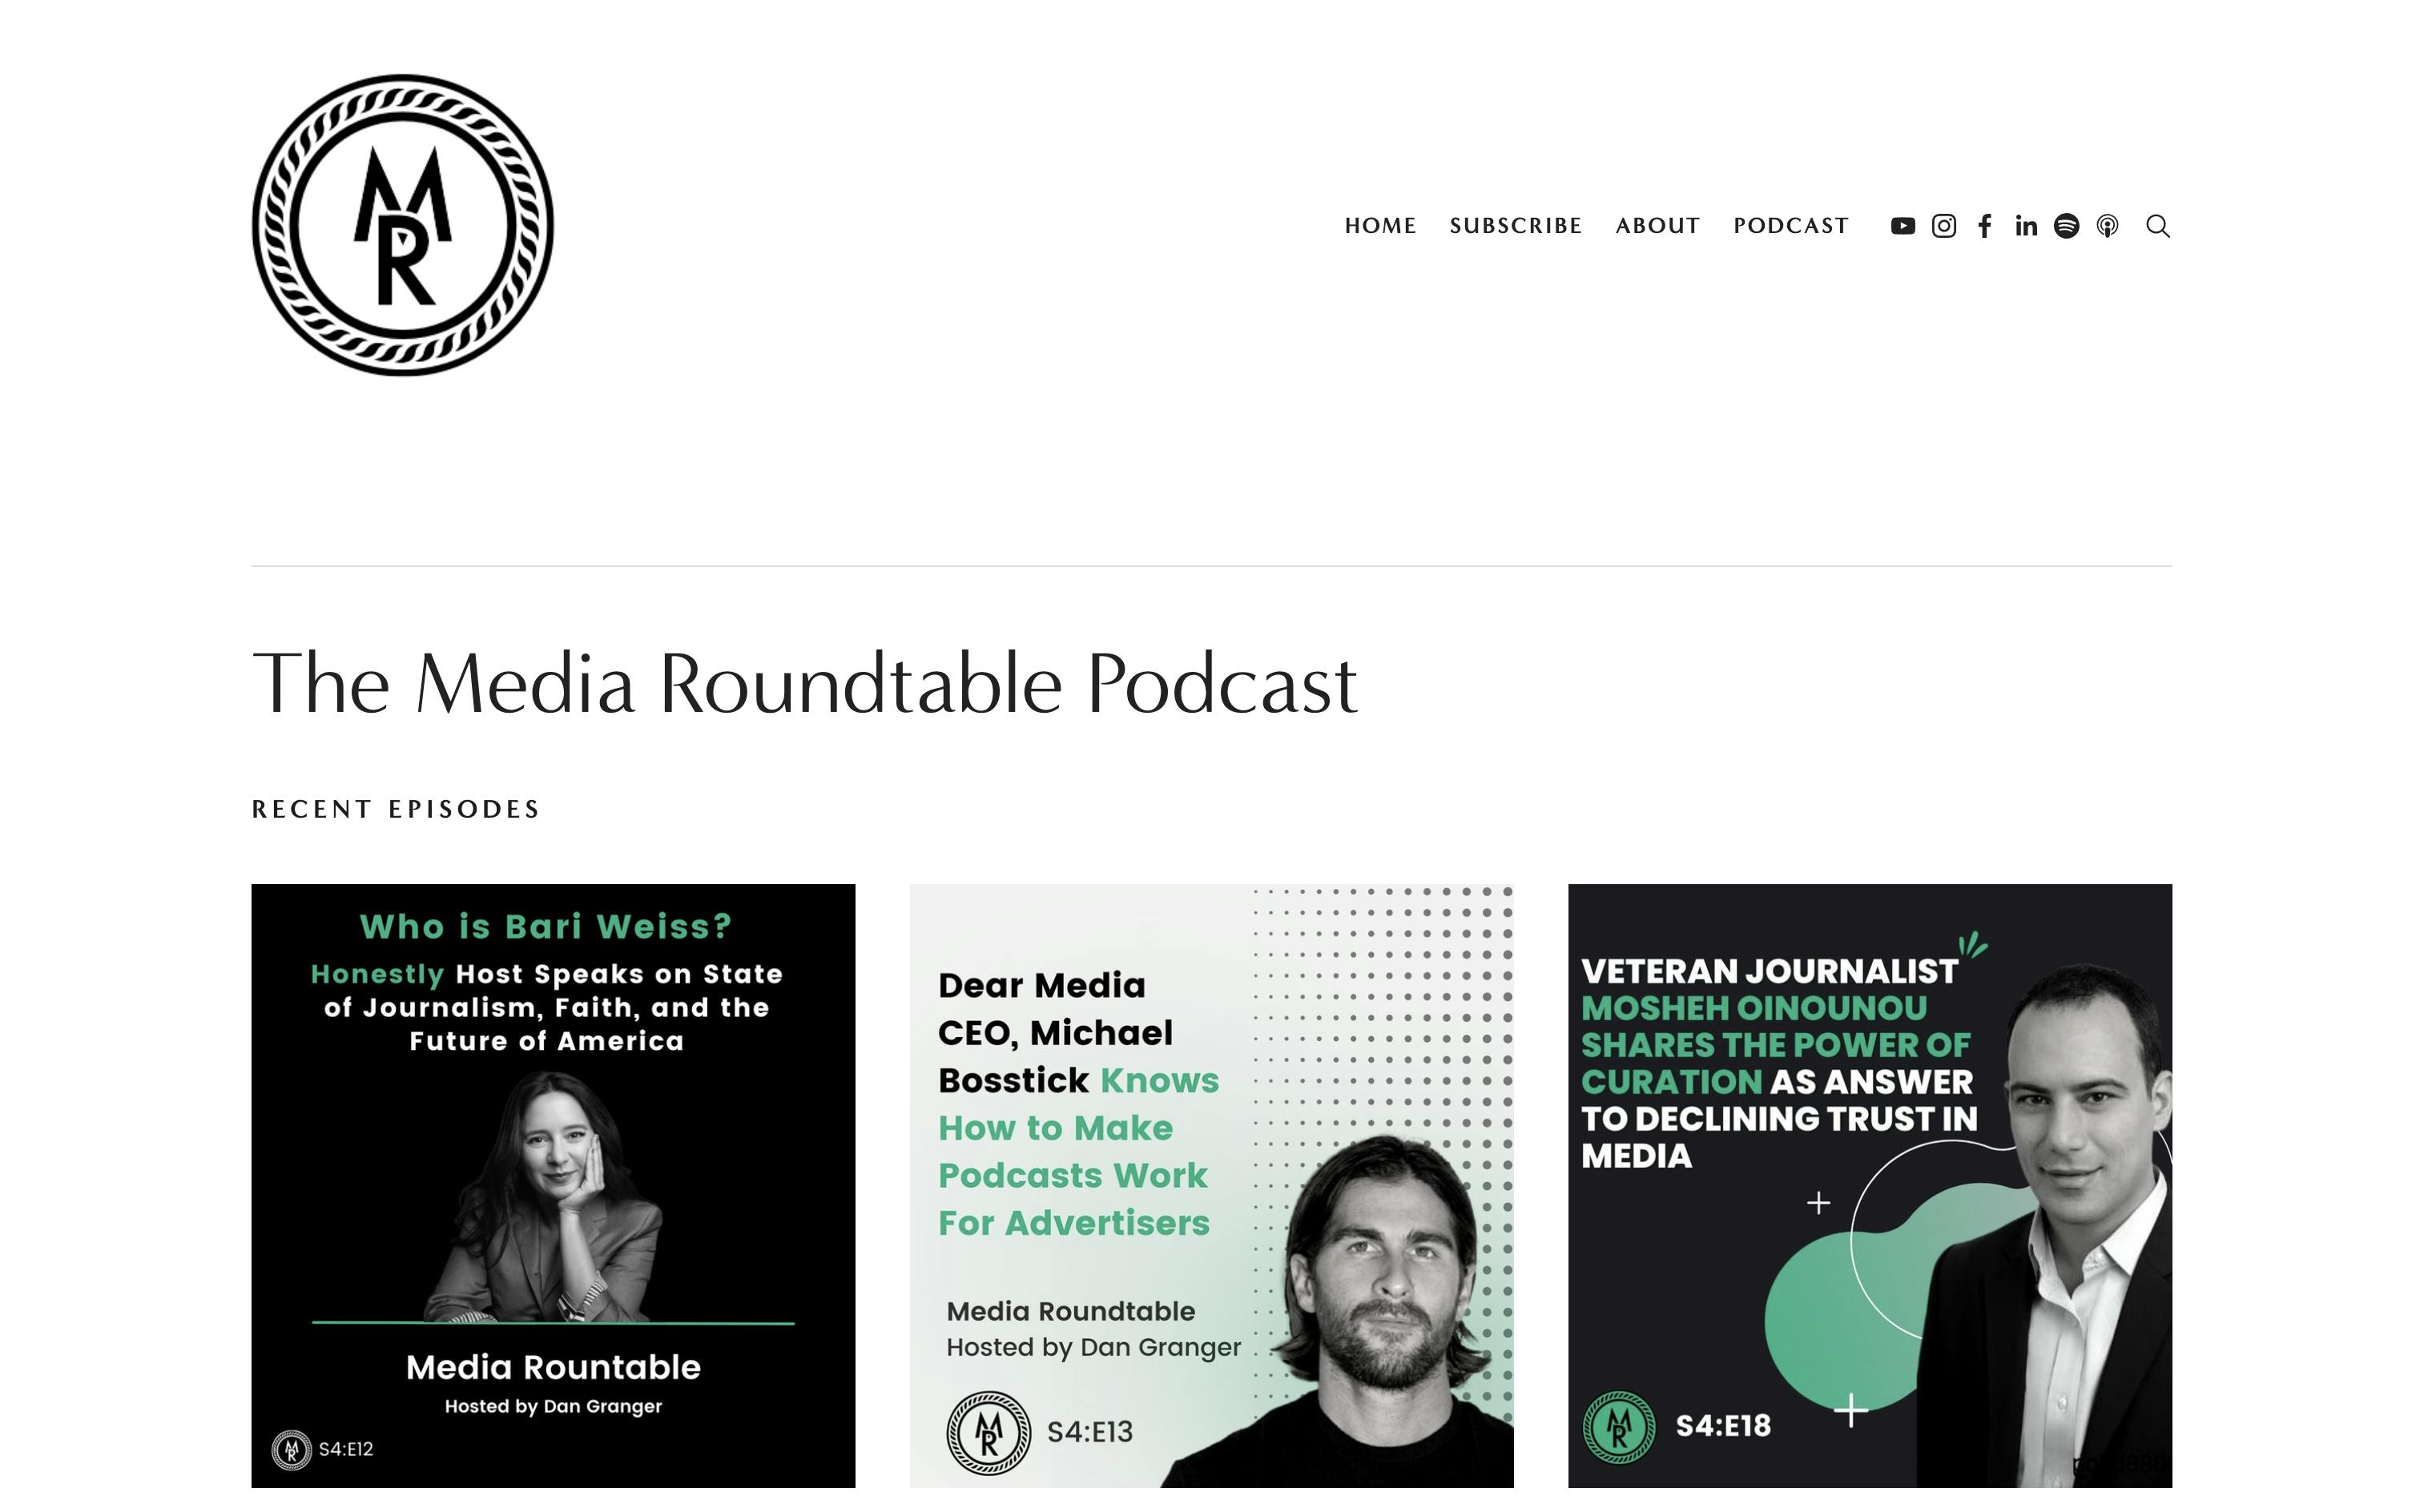 The Media Roundtable Podcast